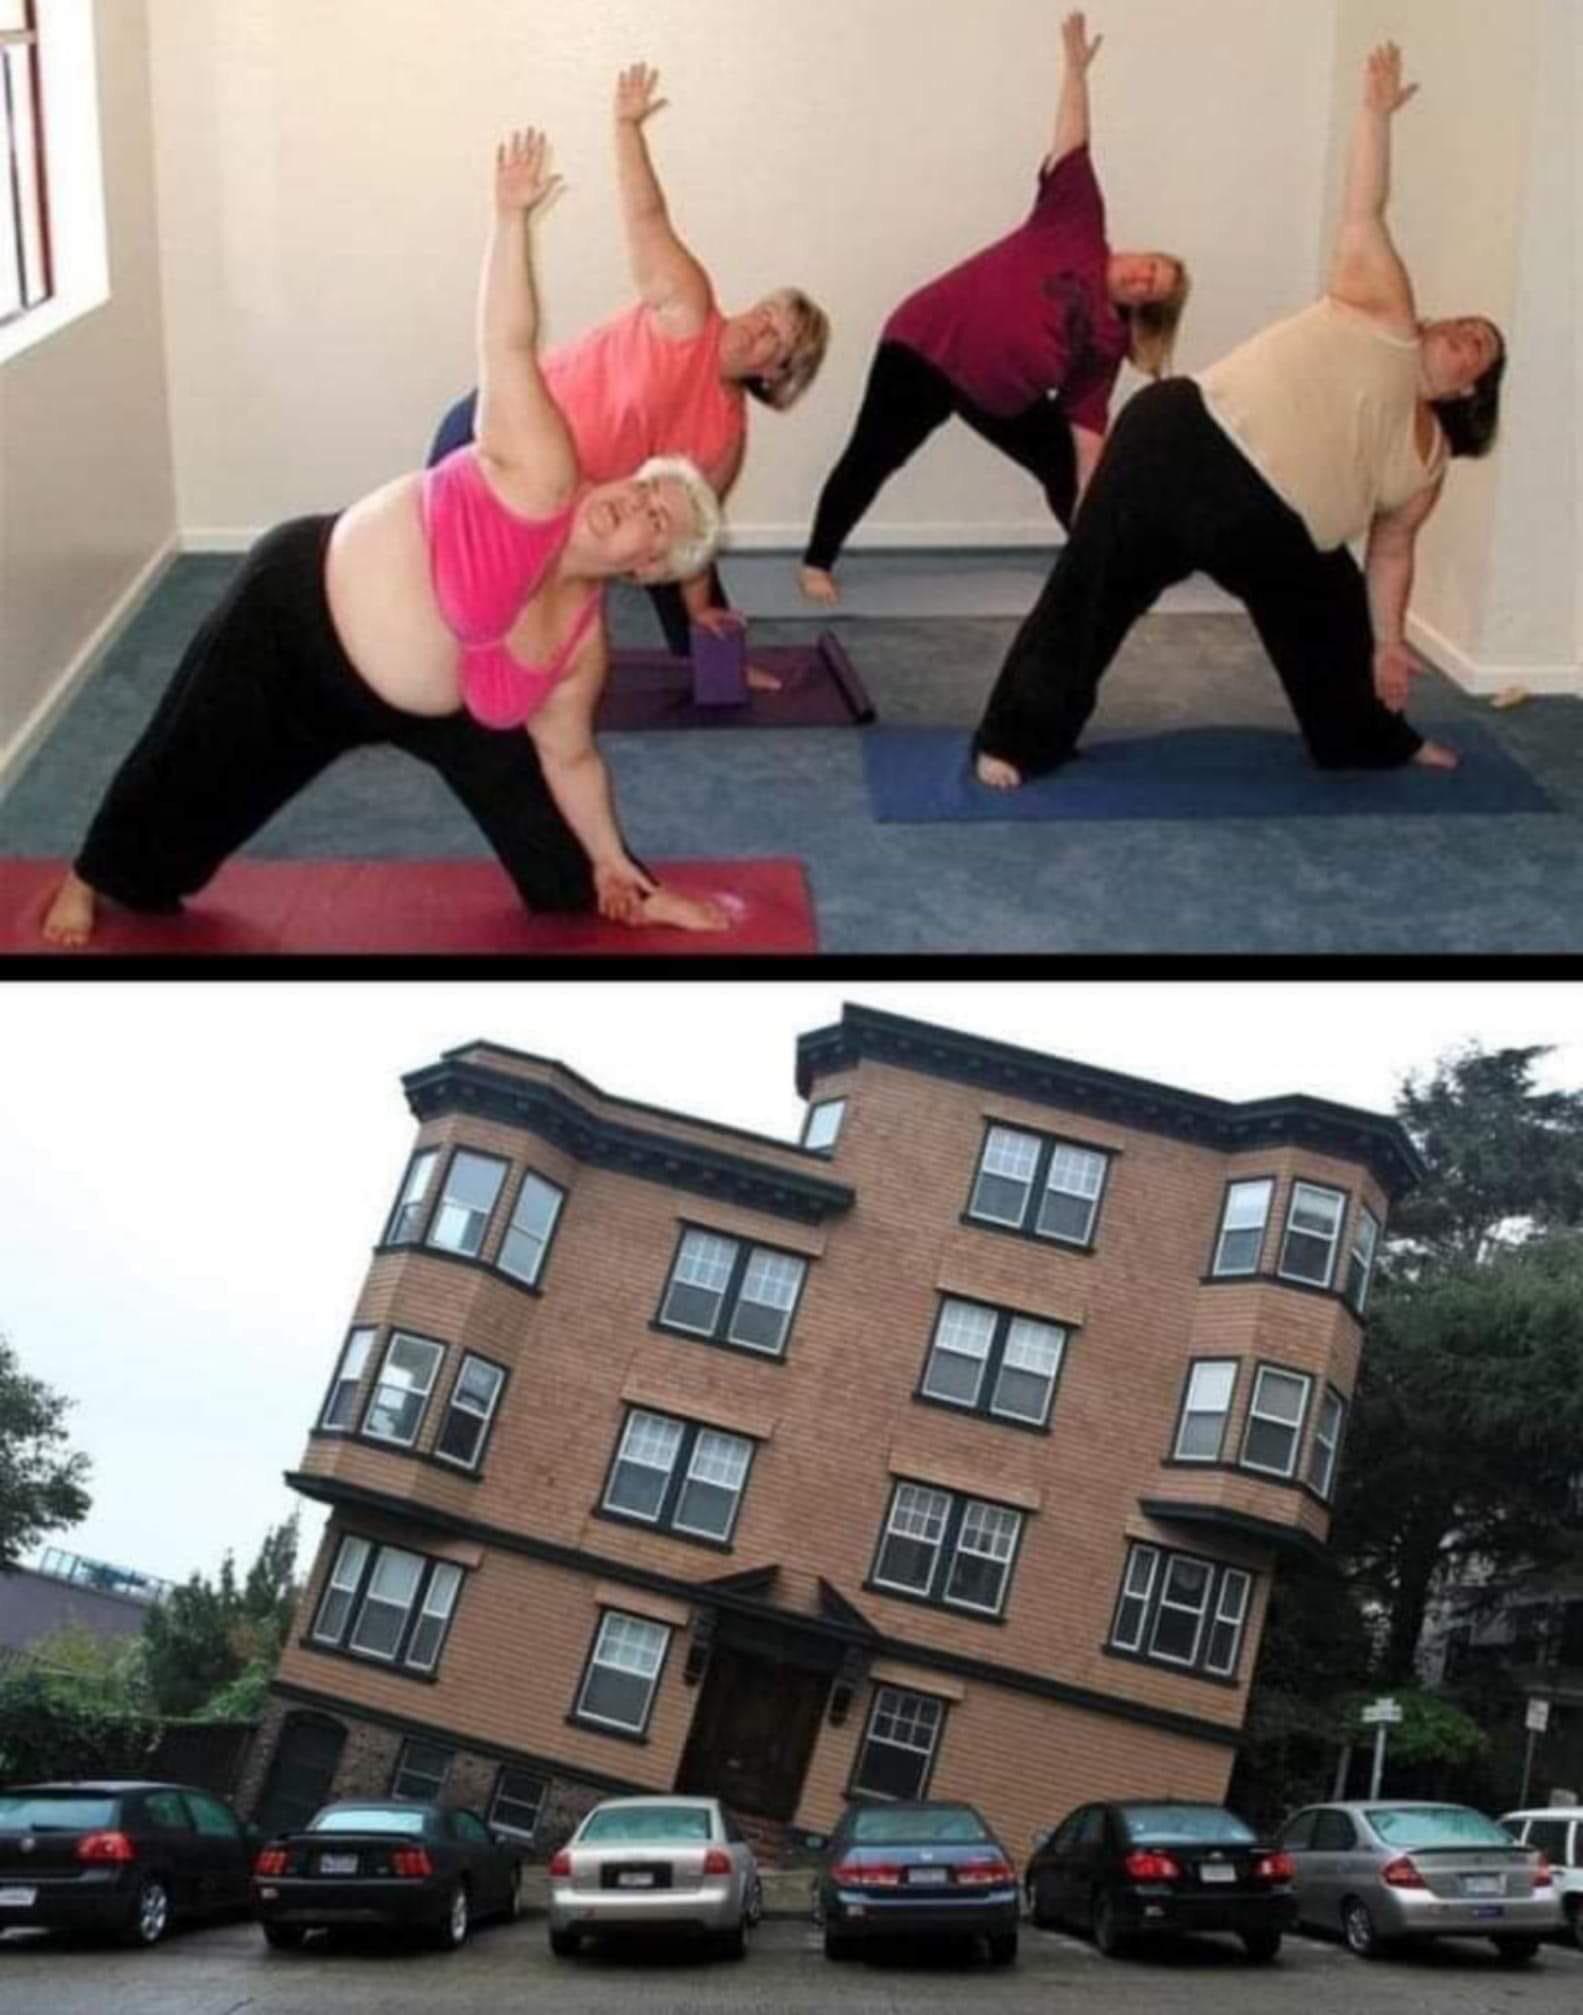 fat people doing yoga and a leaning building